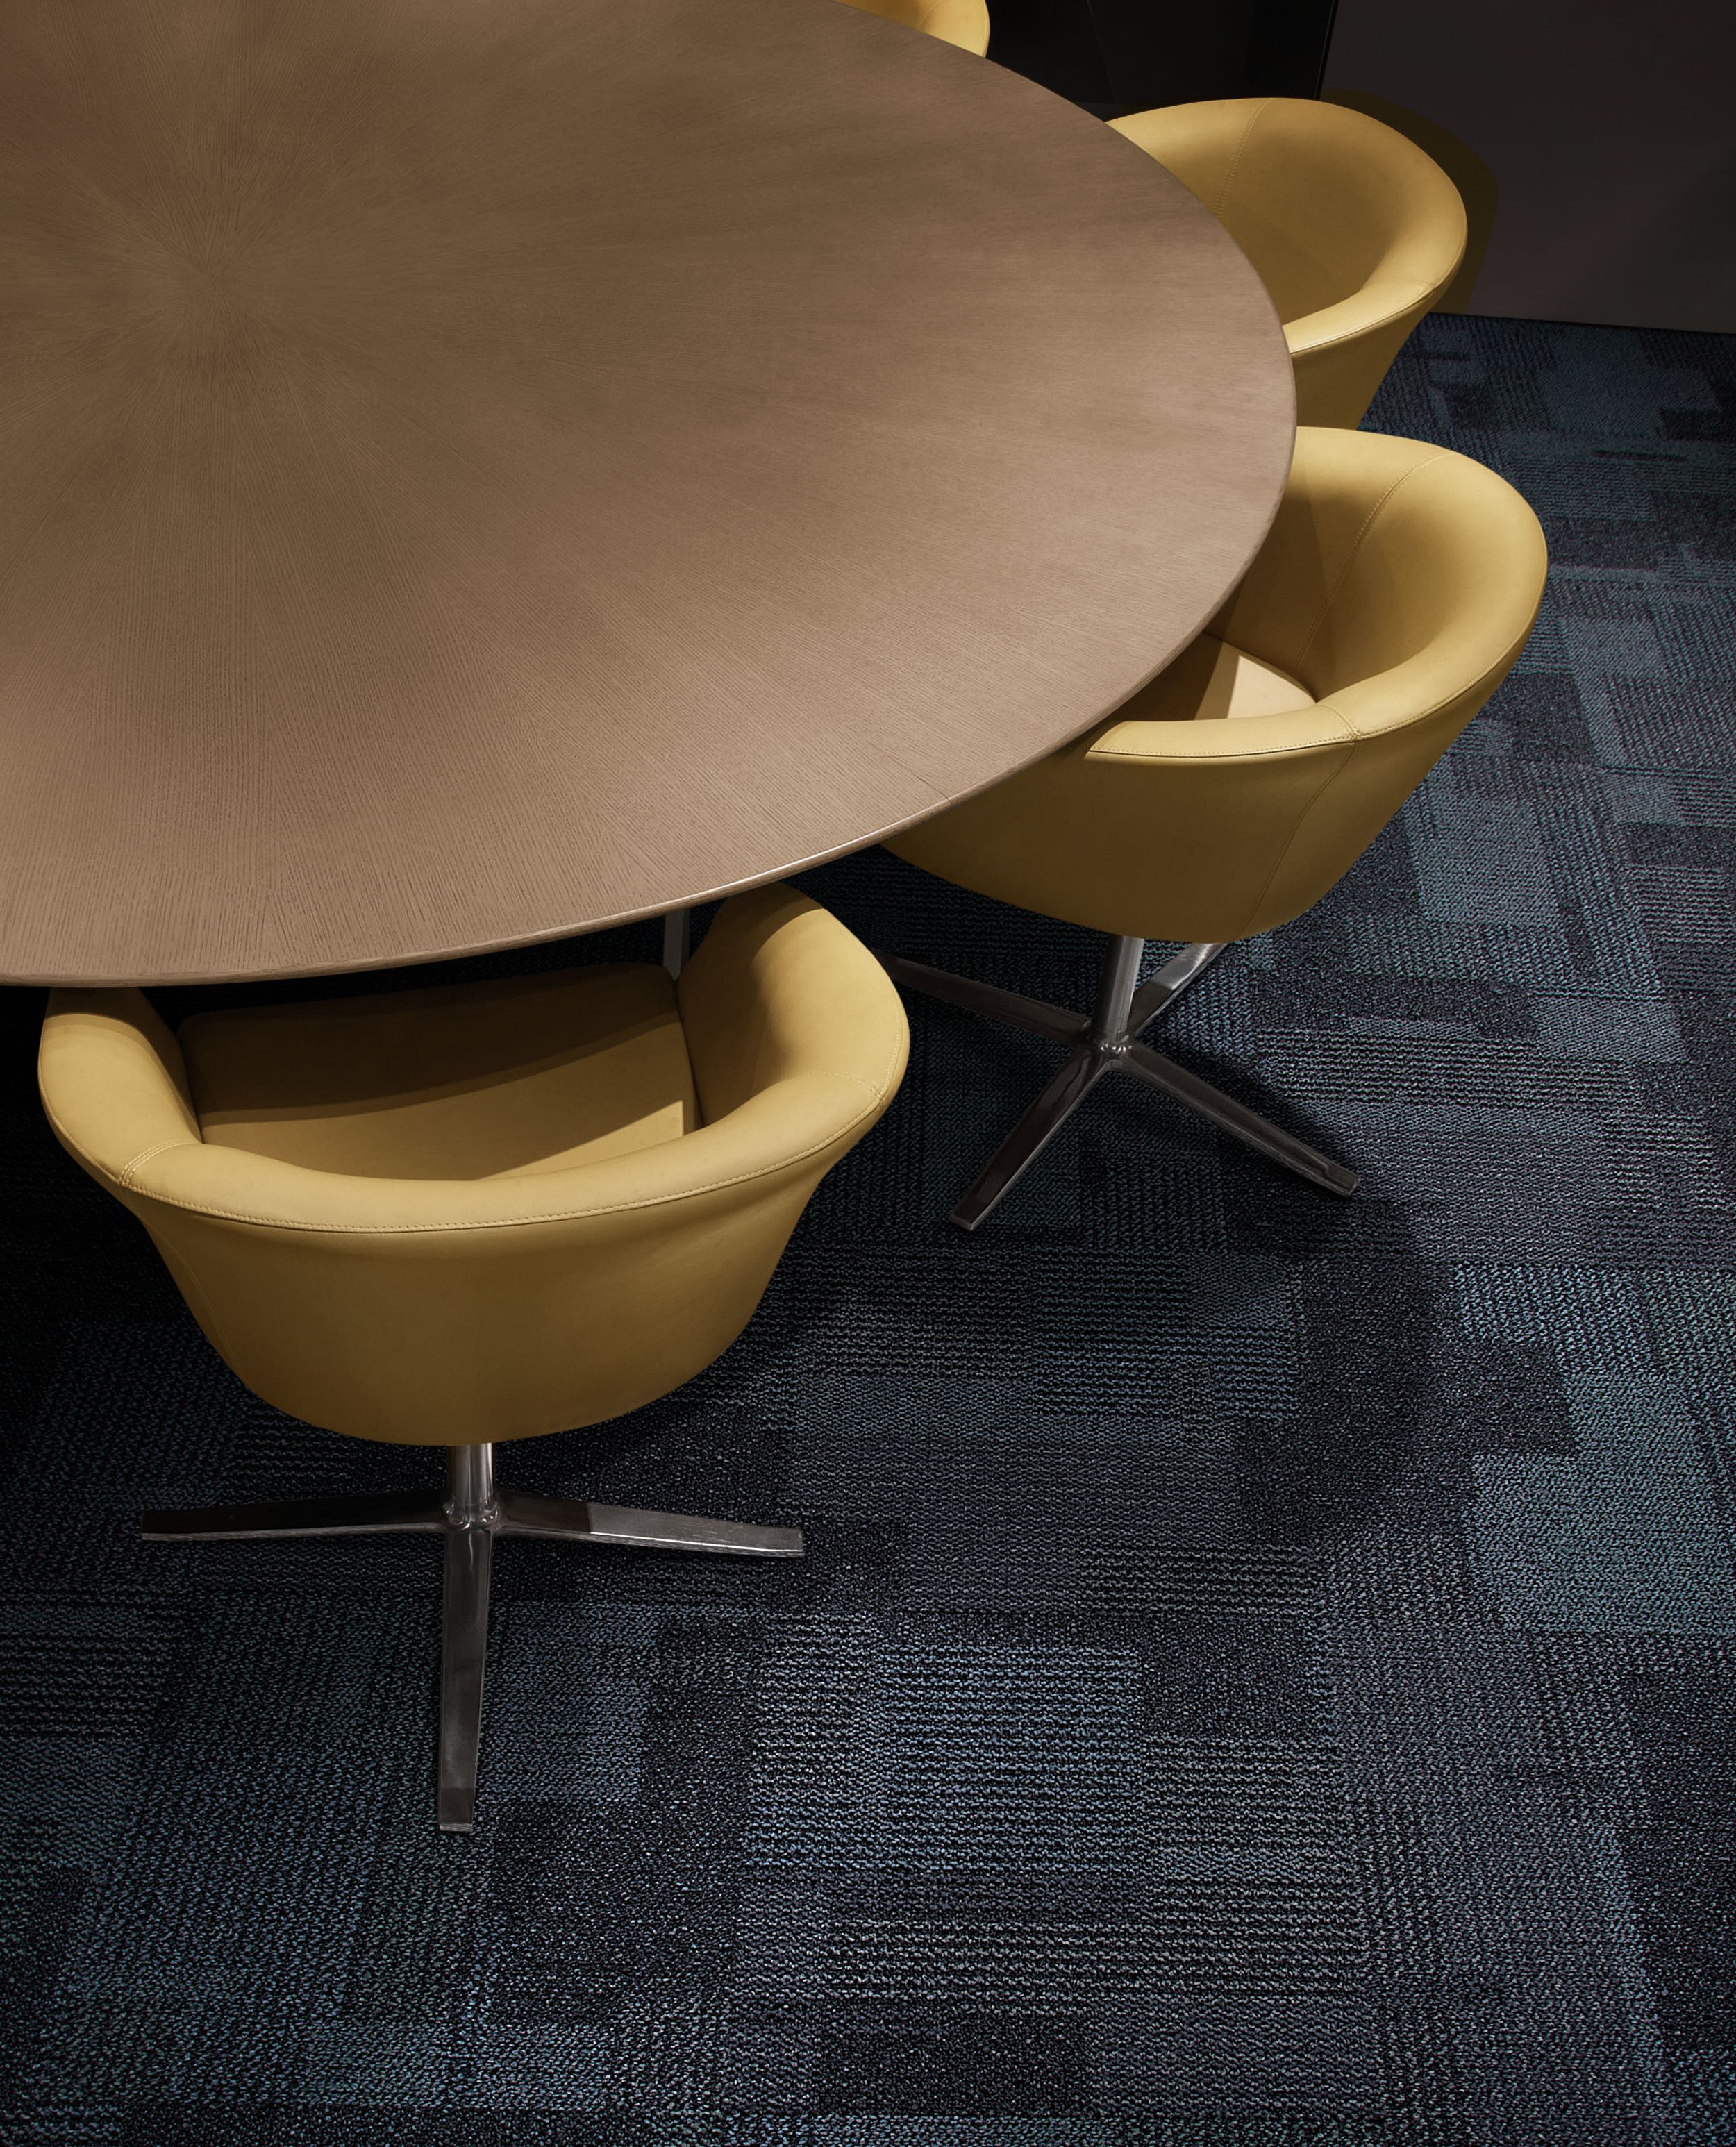 Interface Entropy carpet tile in meeting room with round wooden table and yellow chairs numéro d’image 1